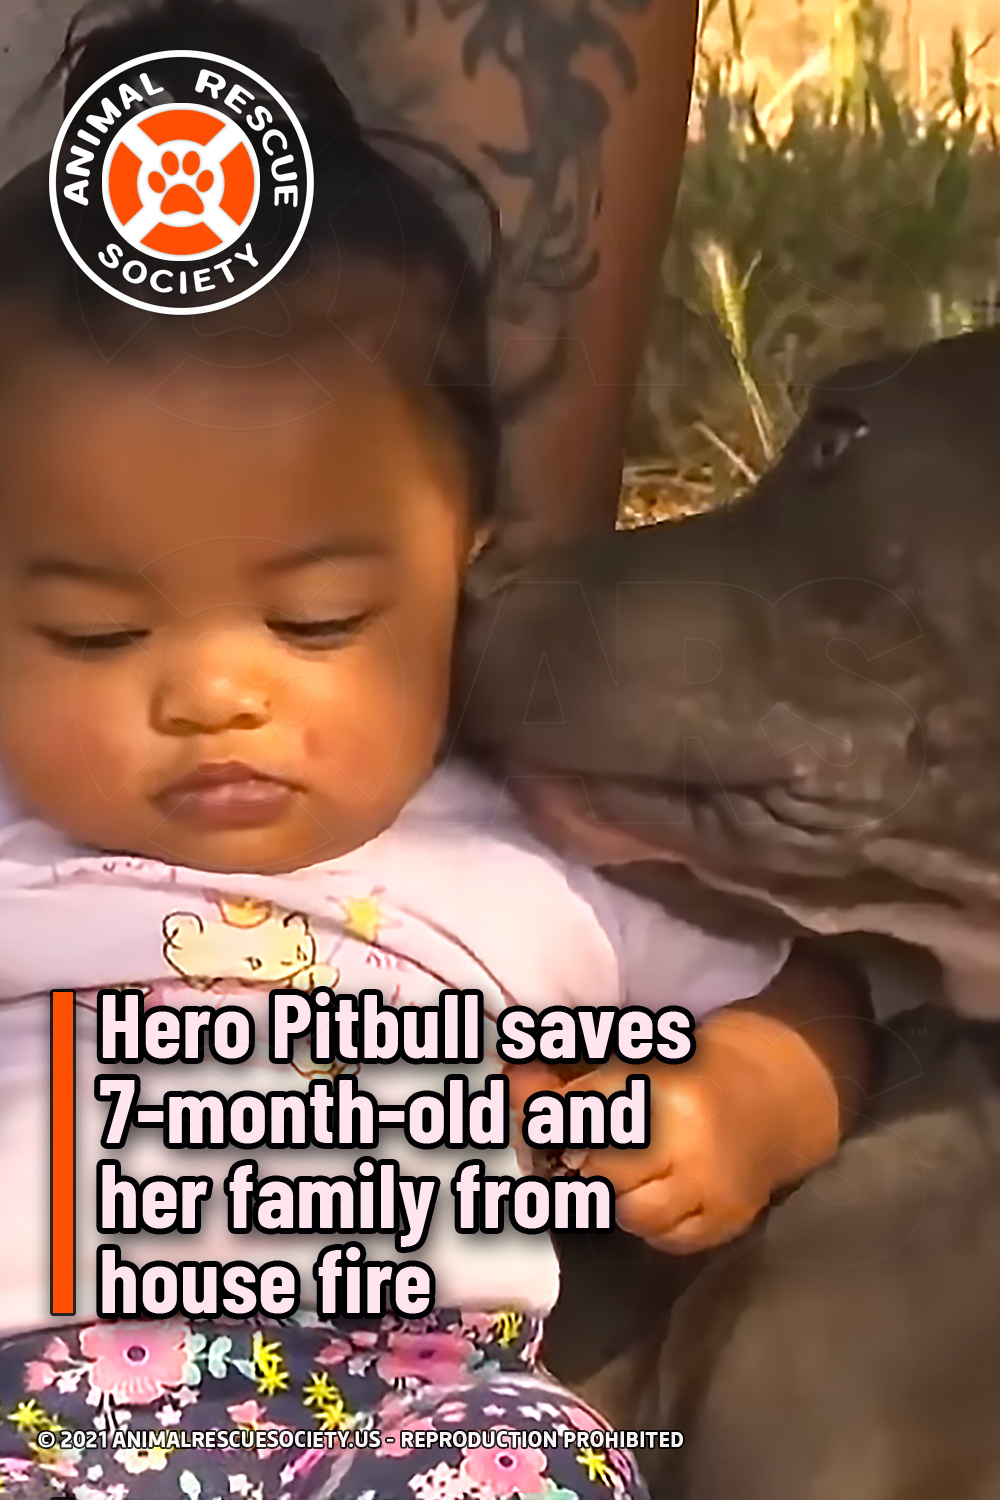 Hero Pitbull saves 7-month-old and her family from house fire